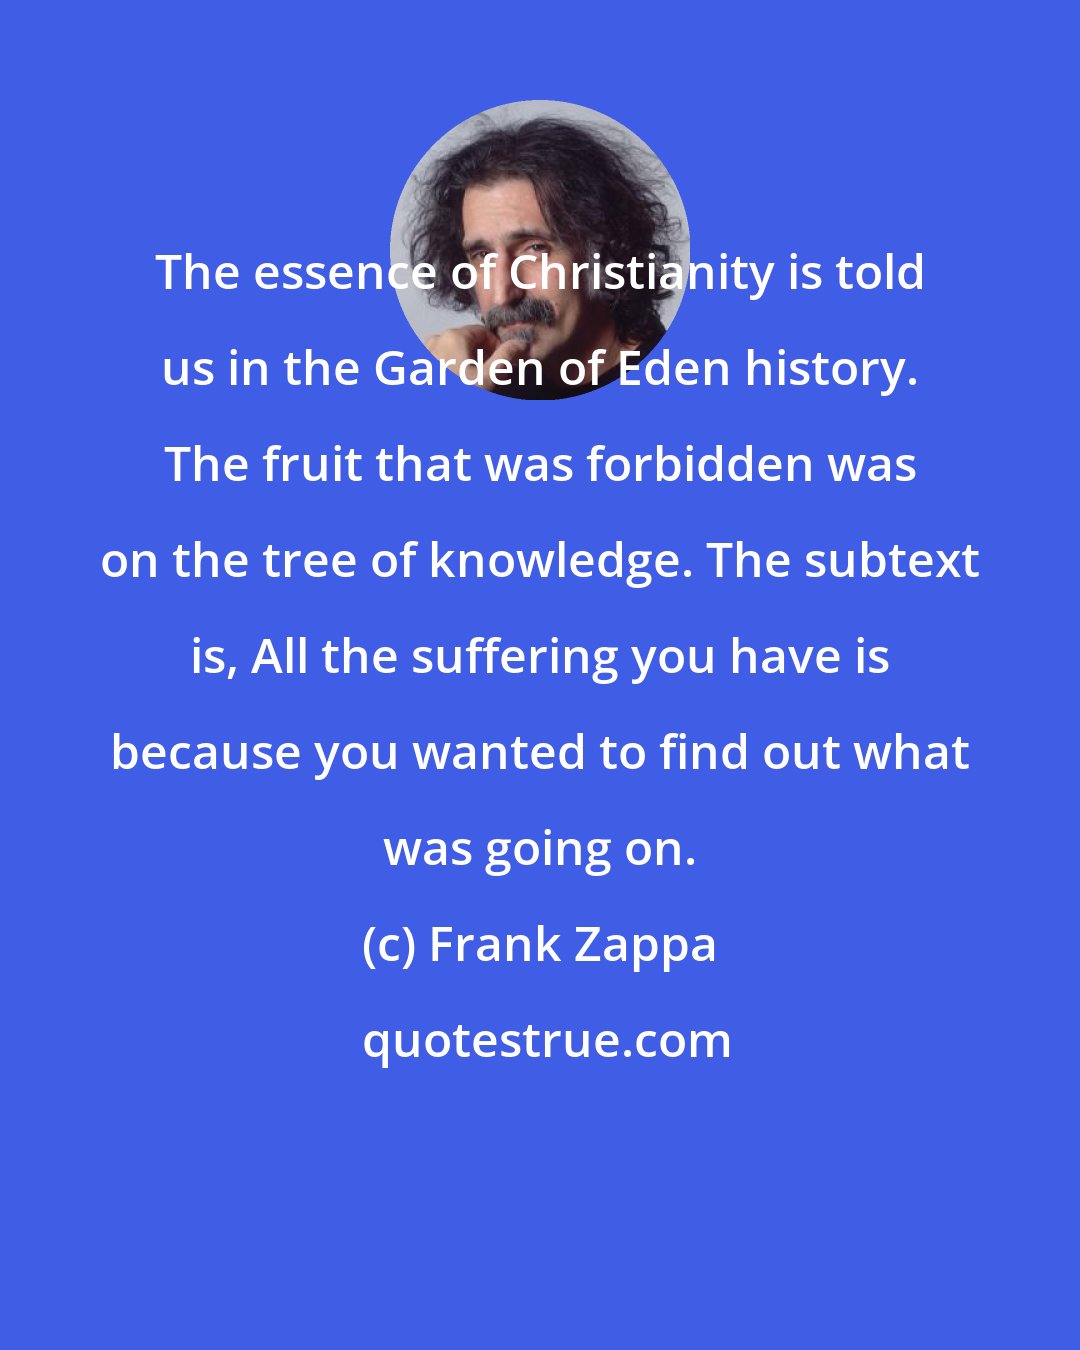 Frank Zappa: The essence of Christianity is told us in the Garden of Eden history. The fruit that was forbidden was on the tree of knowledge. The subtext is, All the suffering you have is because you wanted to find out what was going on.